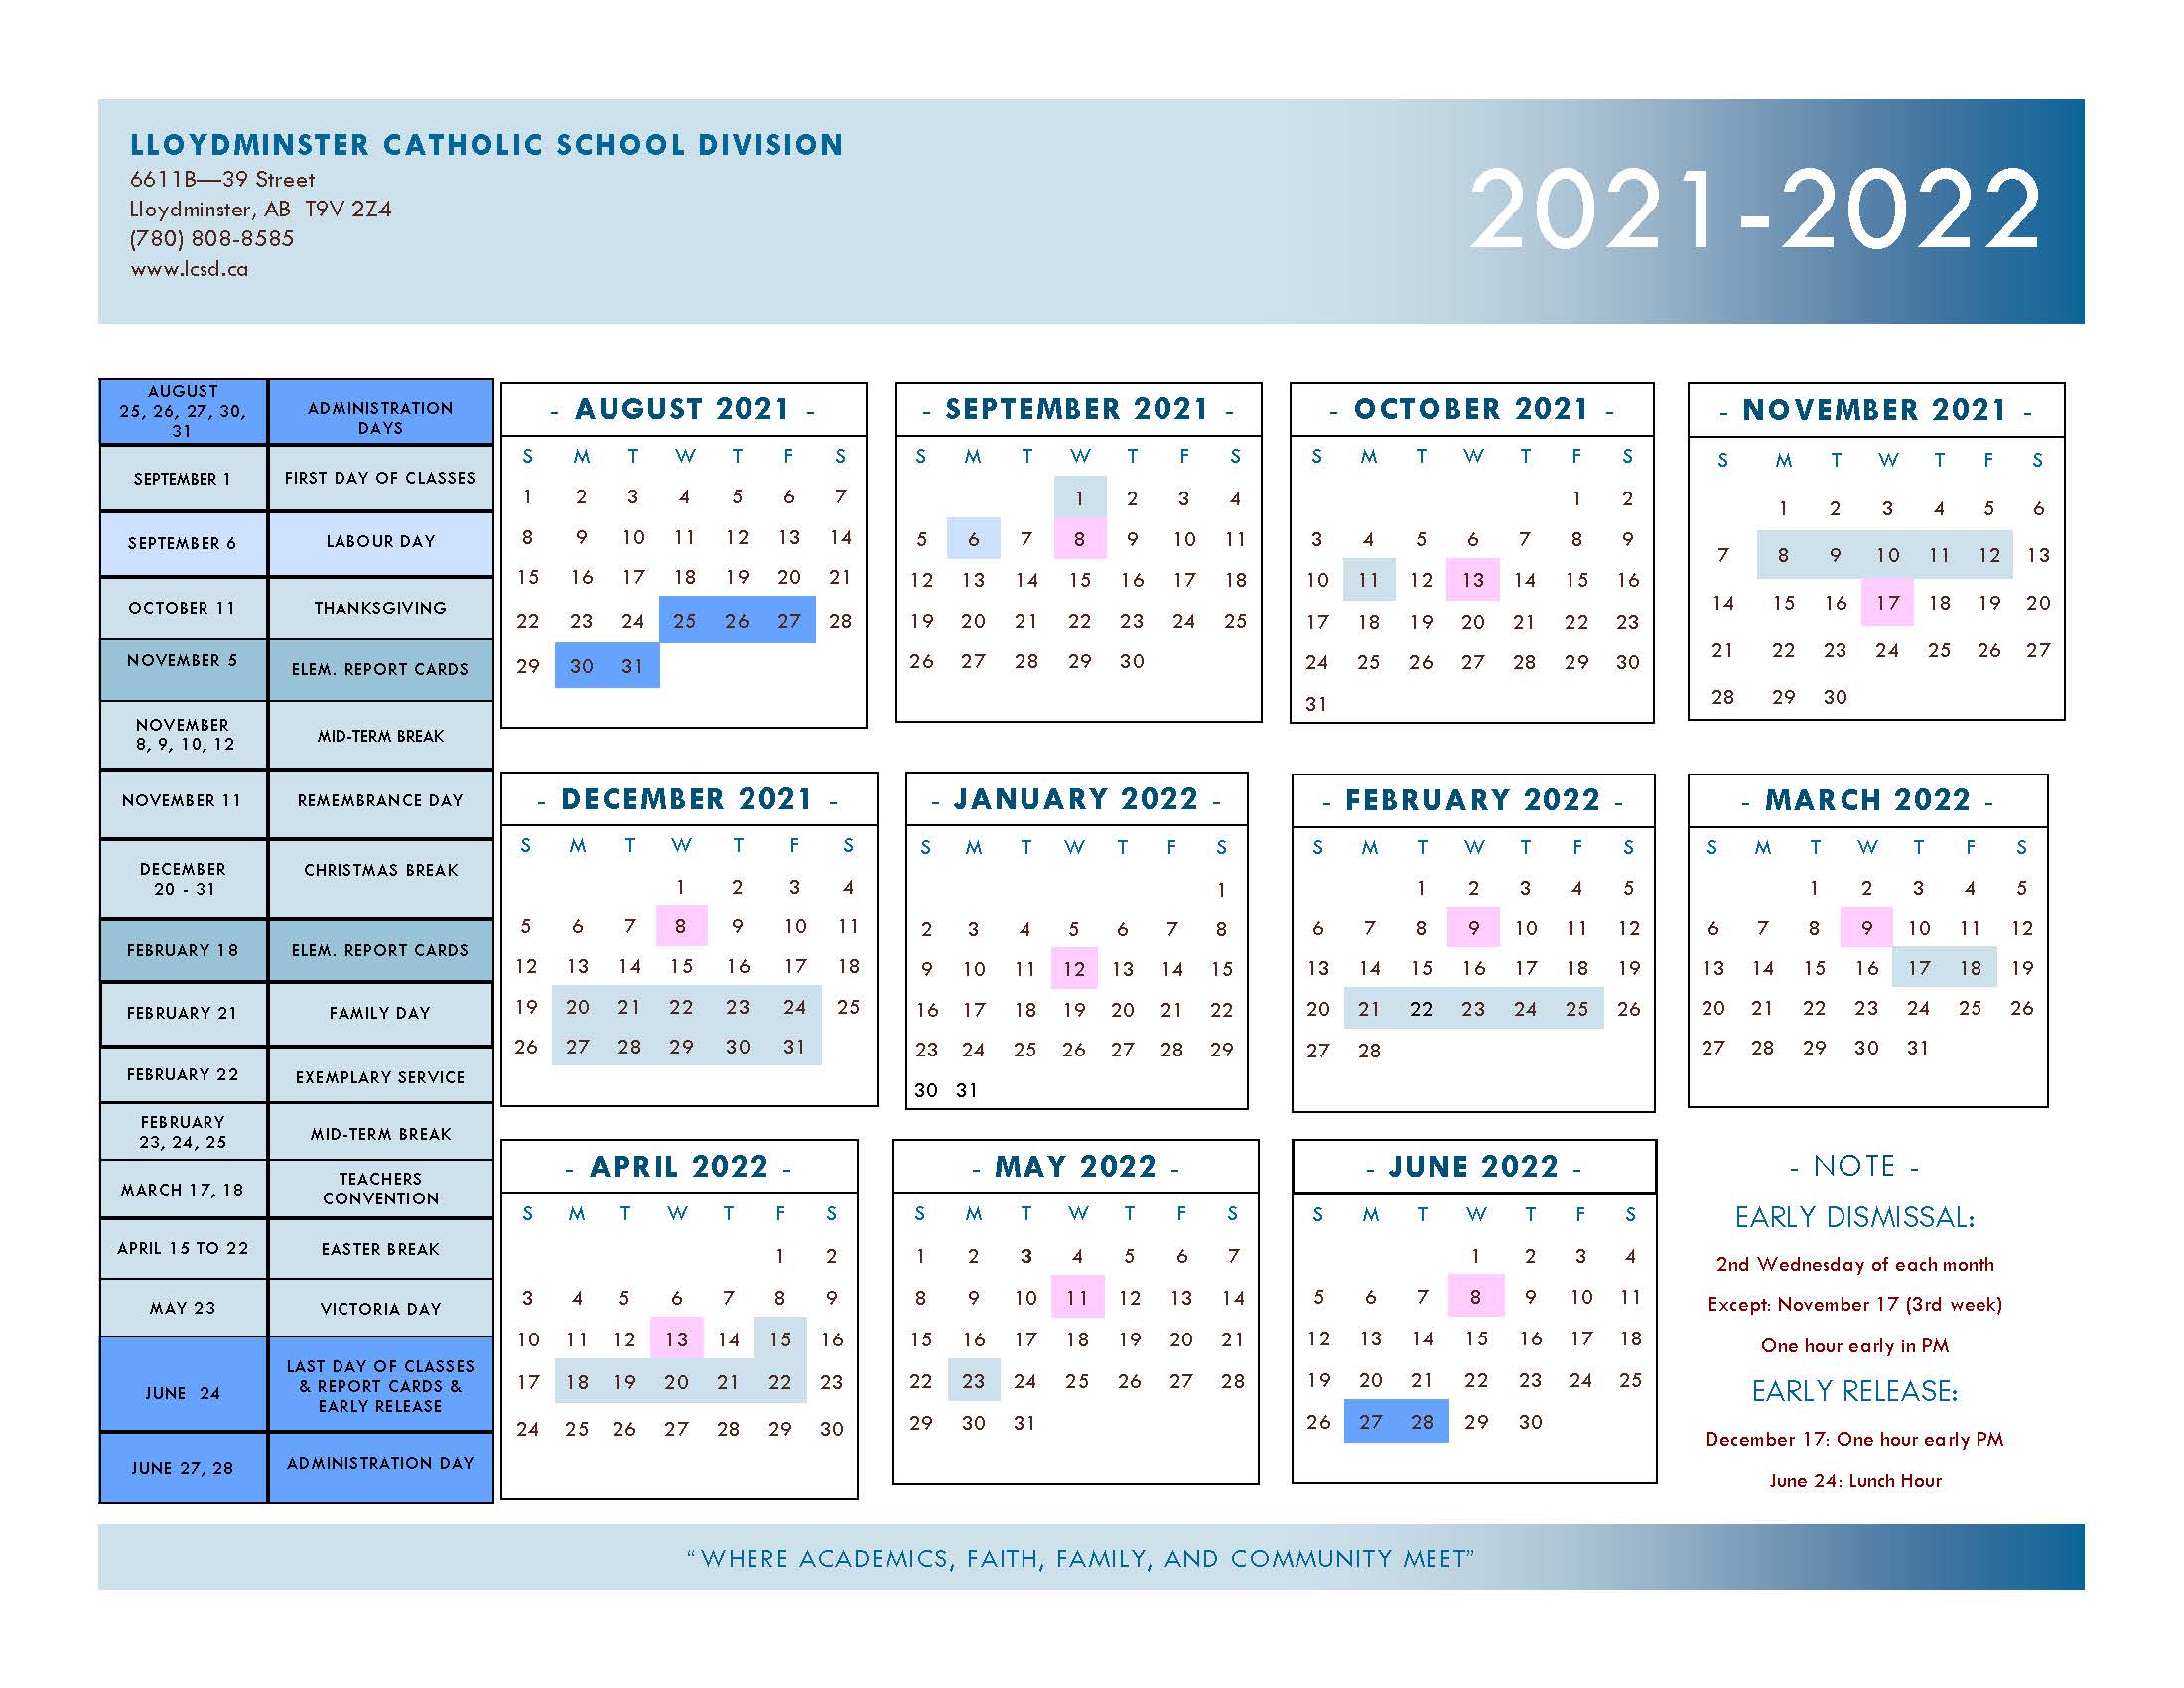 LCSD 2021 2022 School Year Calender approved by Board Jan 27 2020